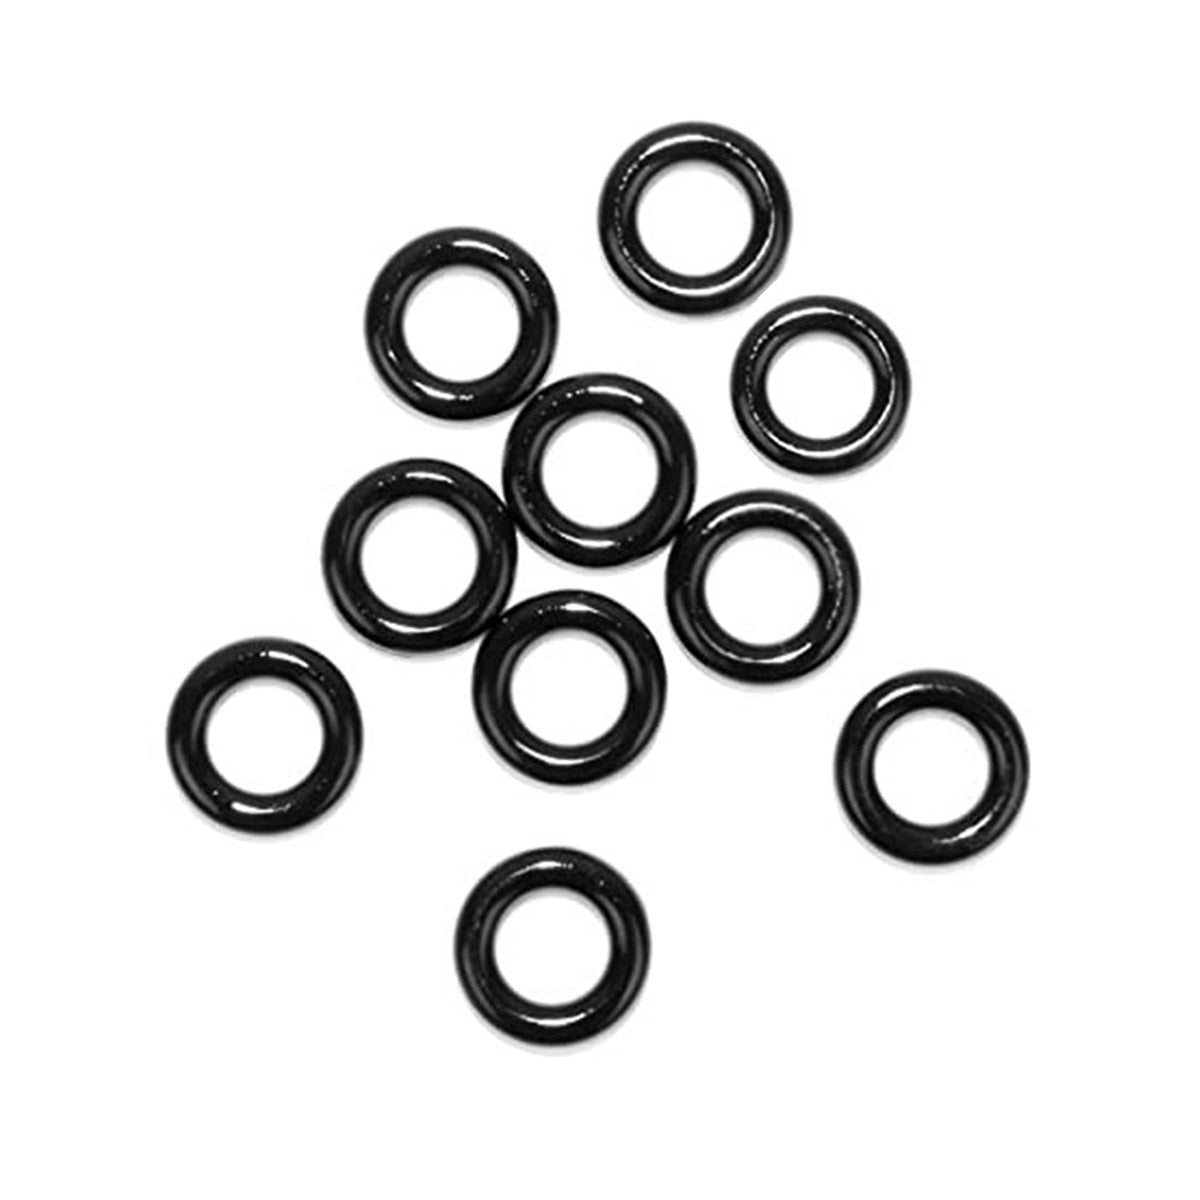 Game Ready O-Rings, Hose Connector Replacement (10 Rings per pack)